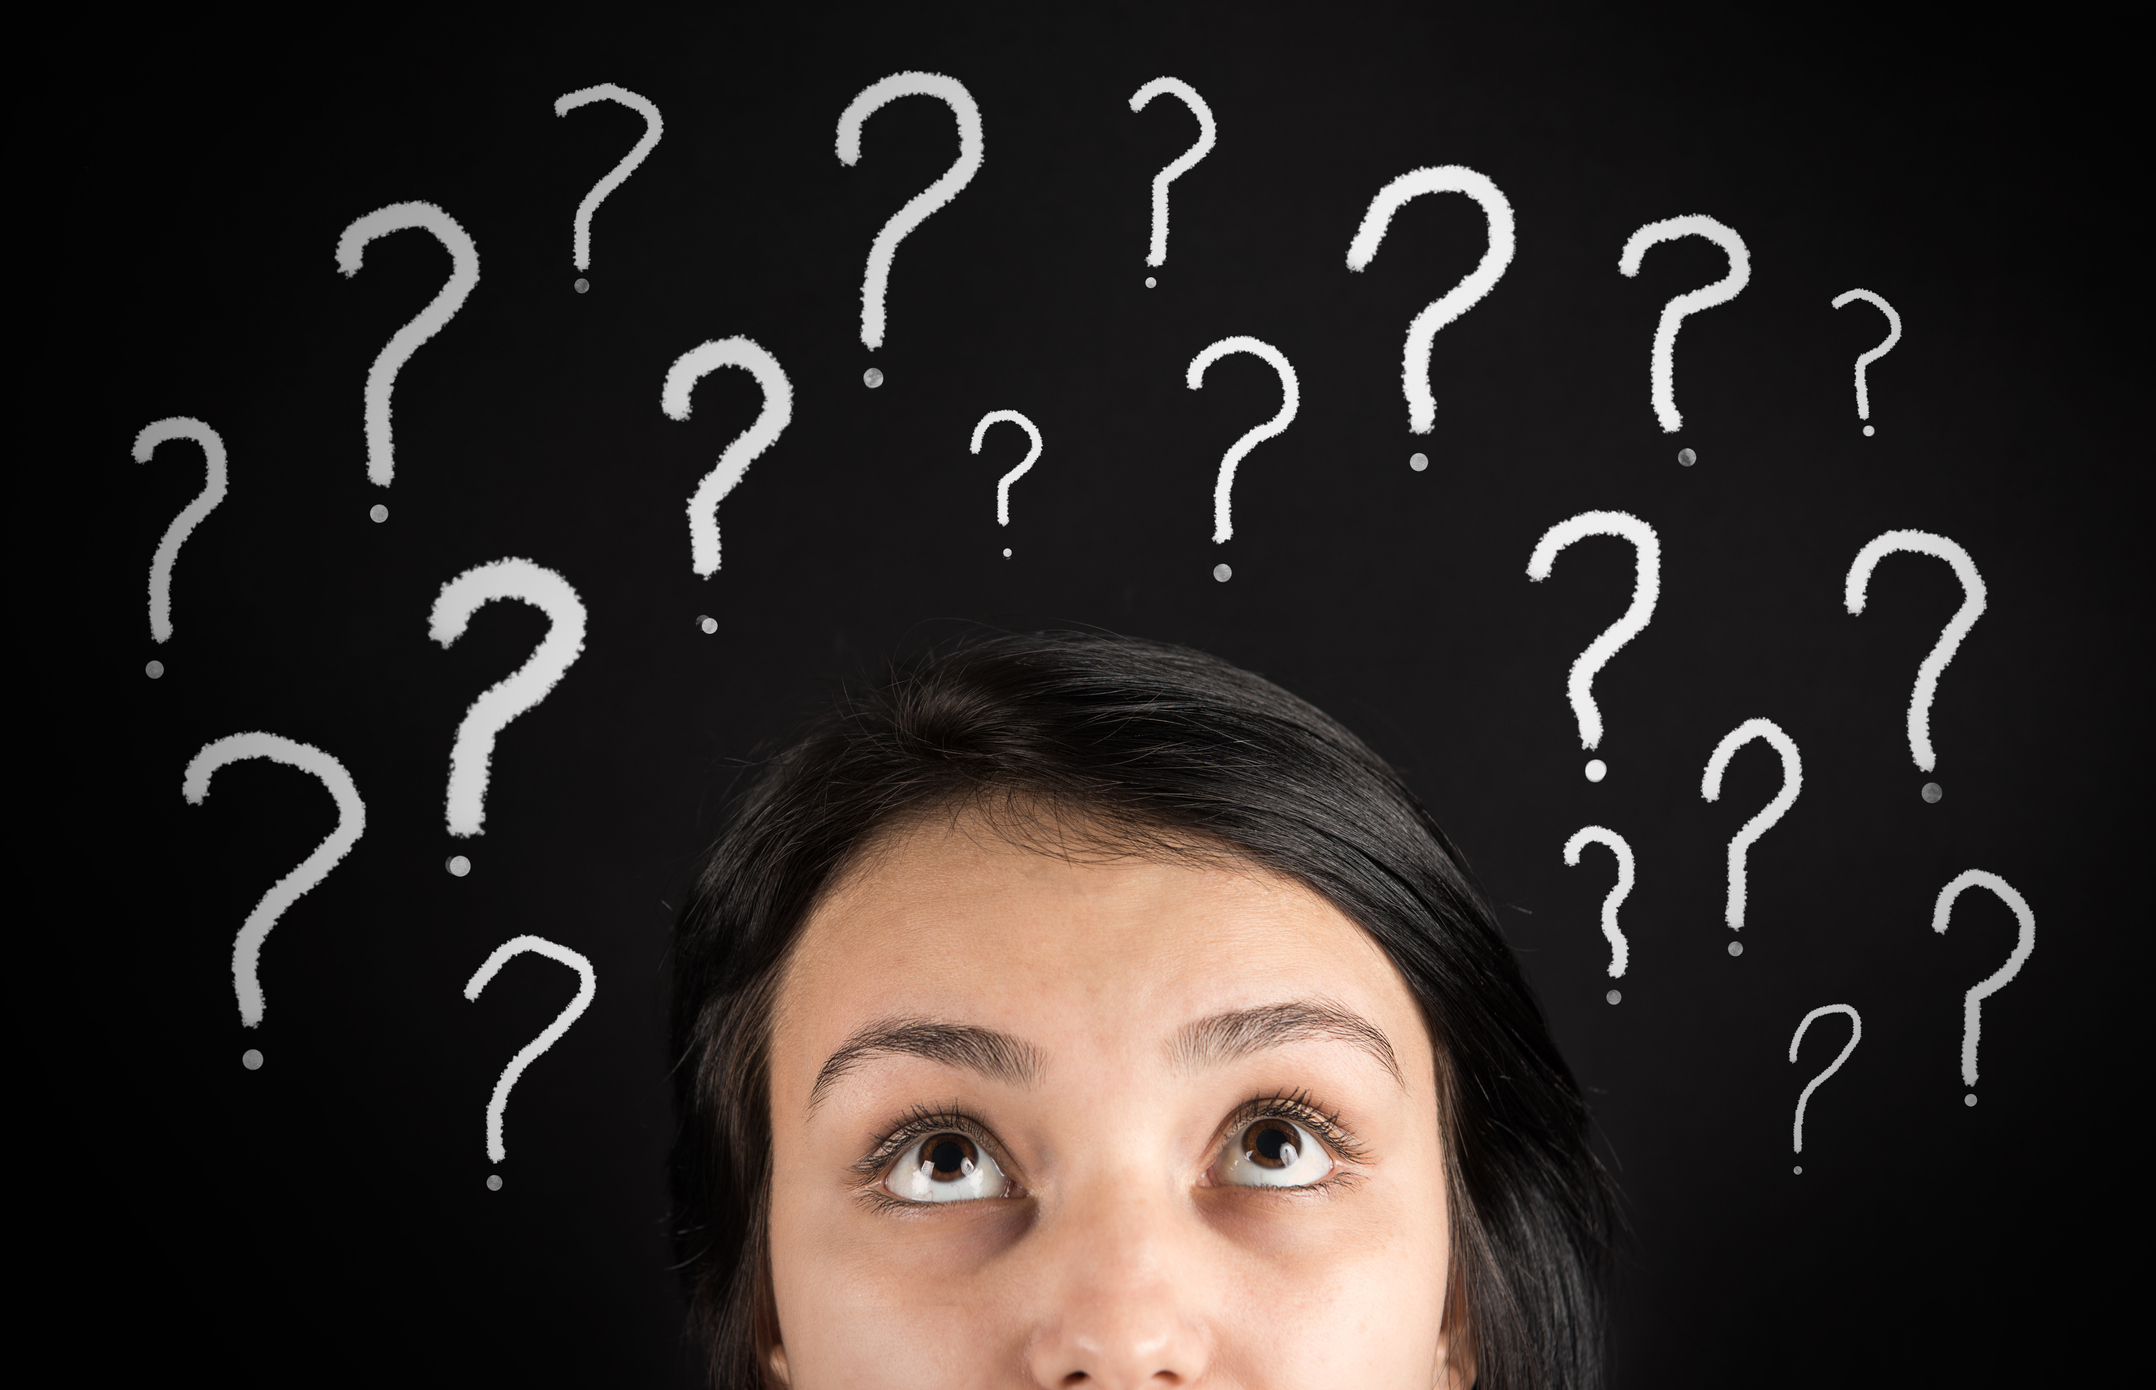 confused woman looking up at question marks above head